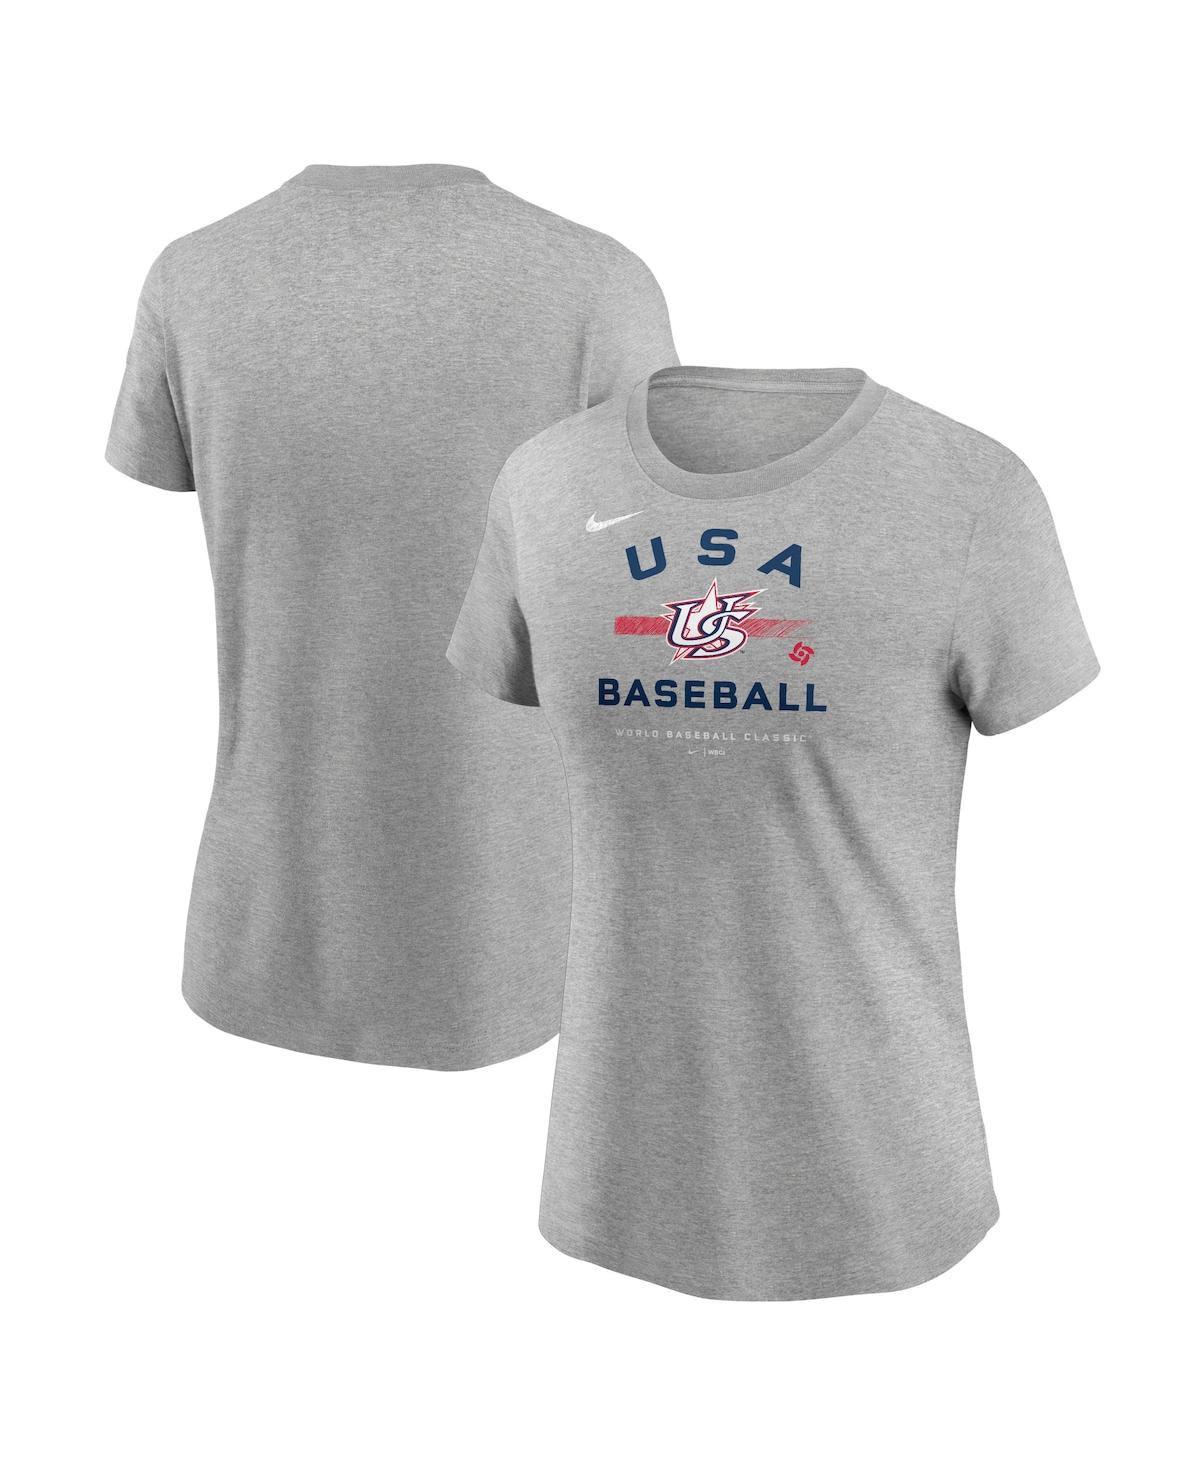 Men's Nike Lou Gehrig Heathered Gray New York Yankees Cooperstown Collection Lou Gehrig Day Retired Number T-Shirt in Heather Gray